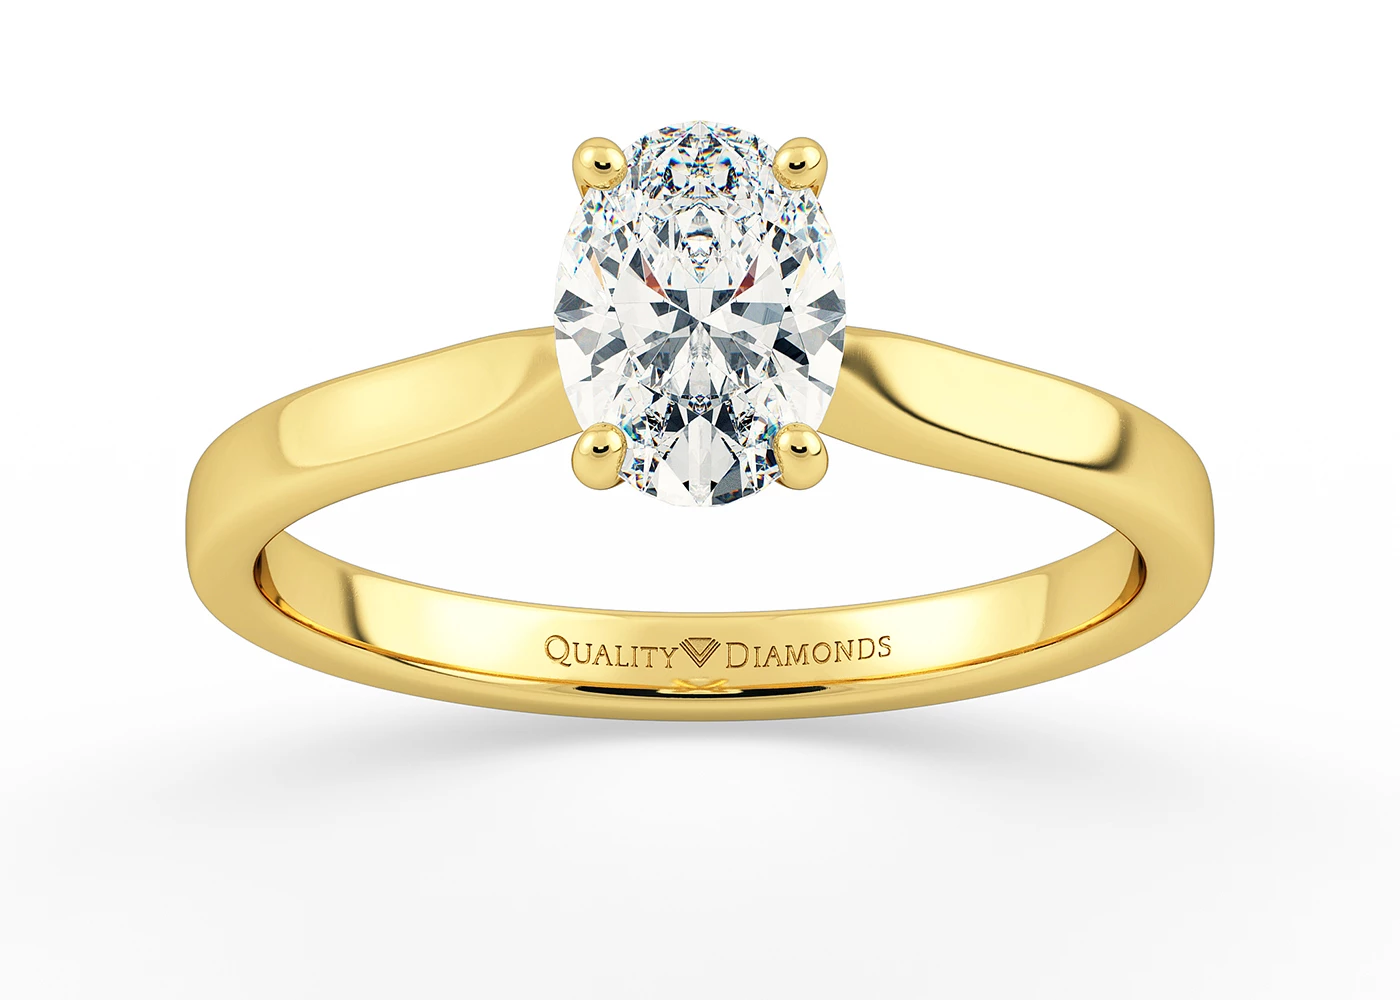 Oval Beau Diamond Ring in 9K Yellow Gold